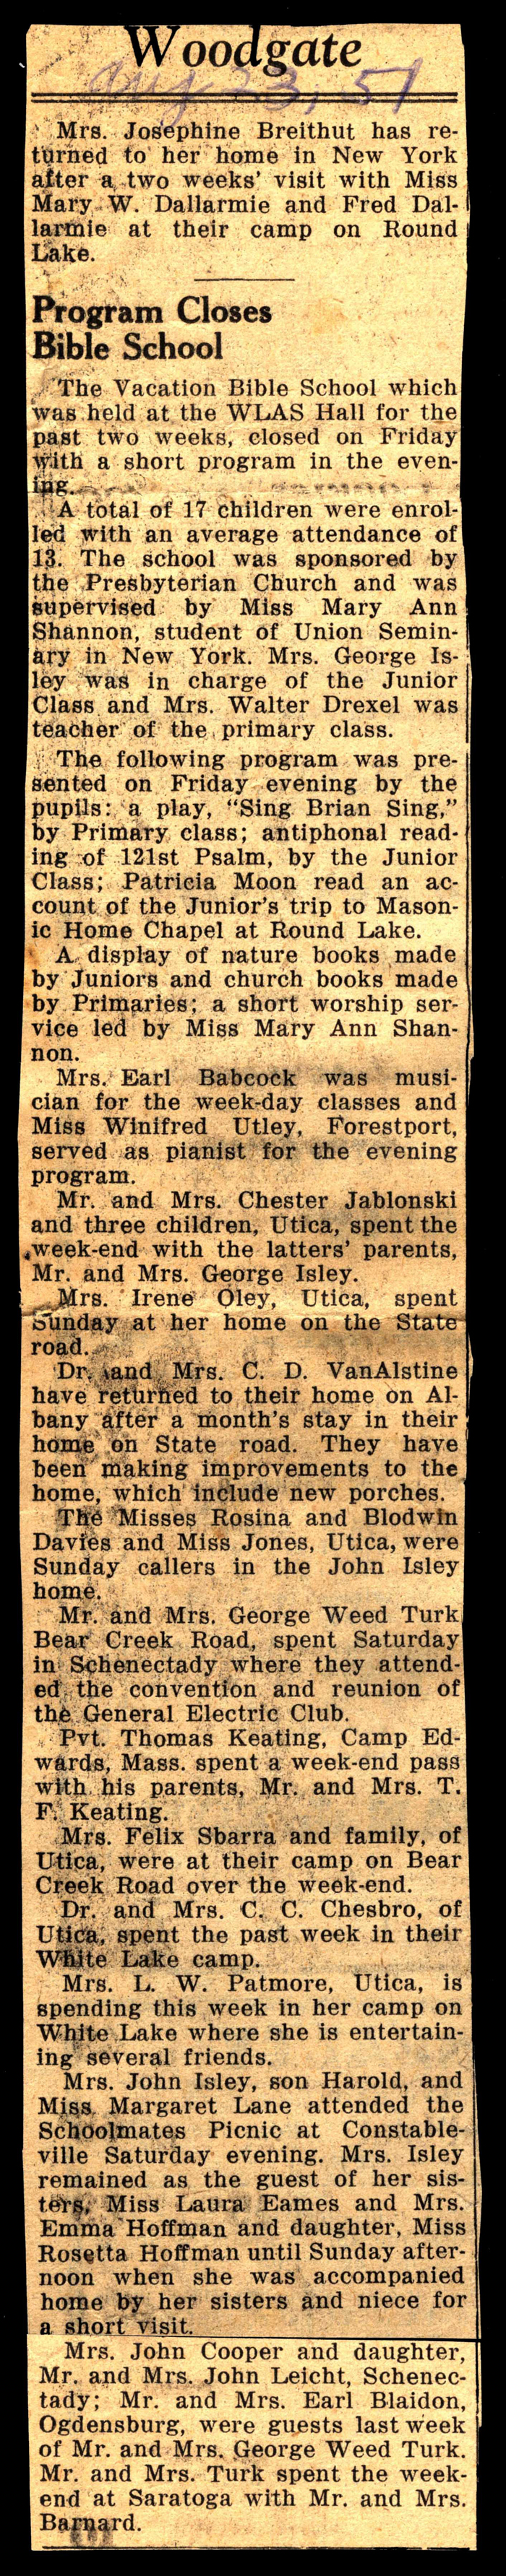 woodgate news august 23 1951